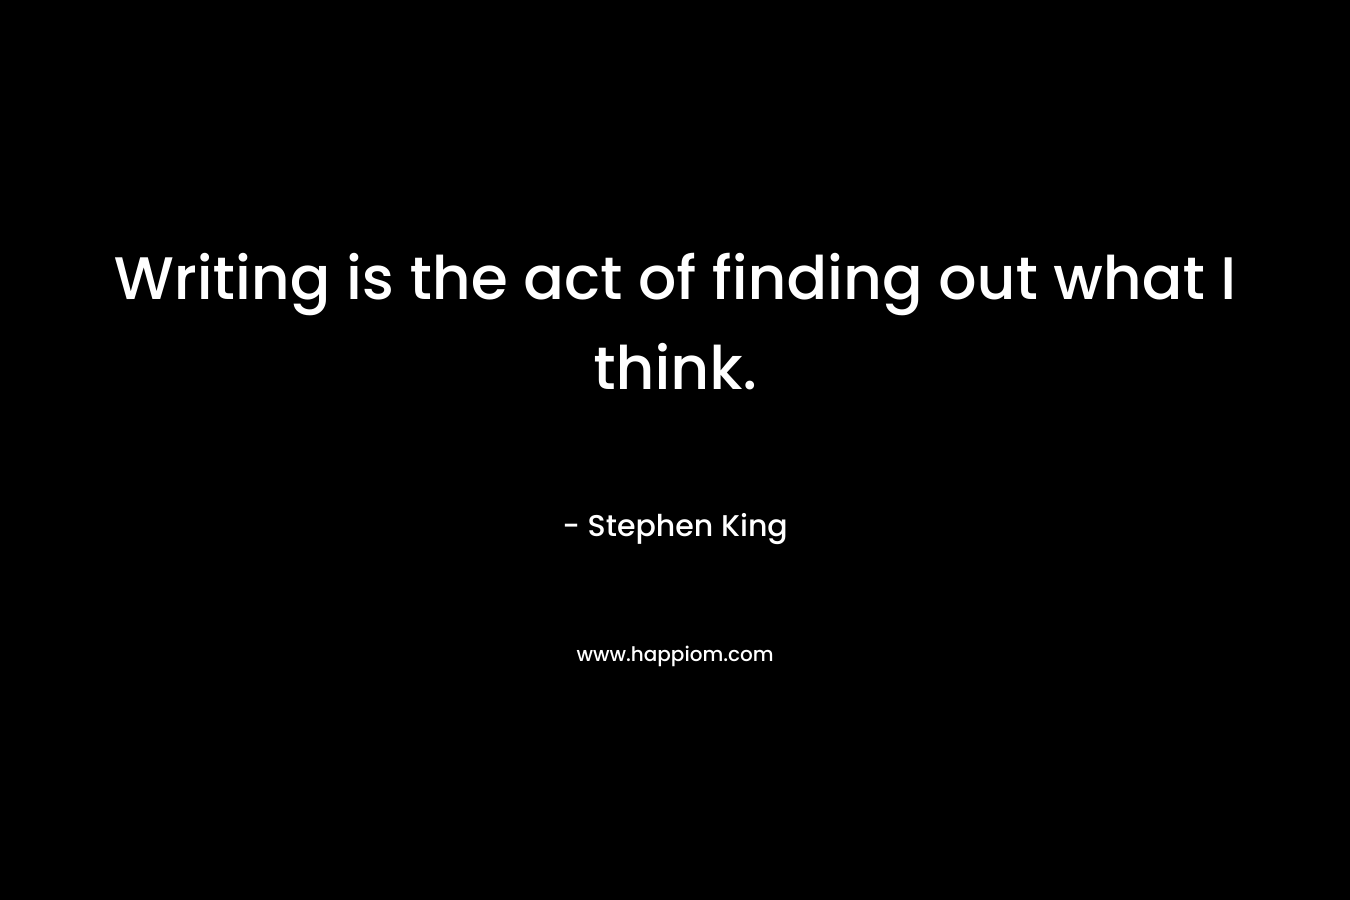 Writing is the act of finding out what I think. – Stephen King